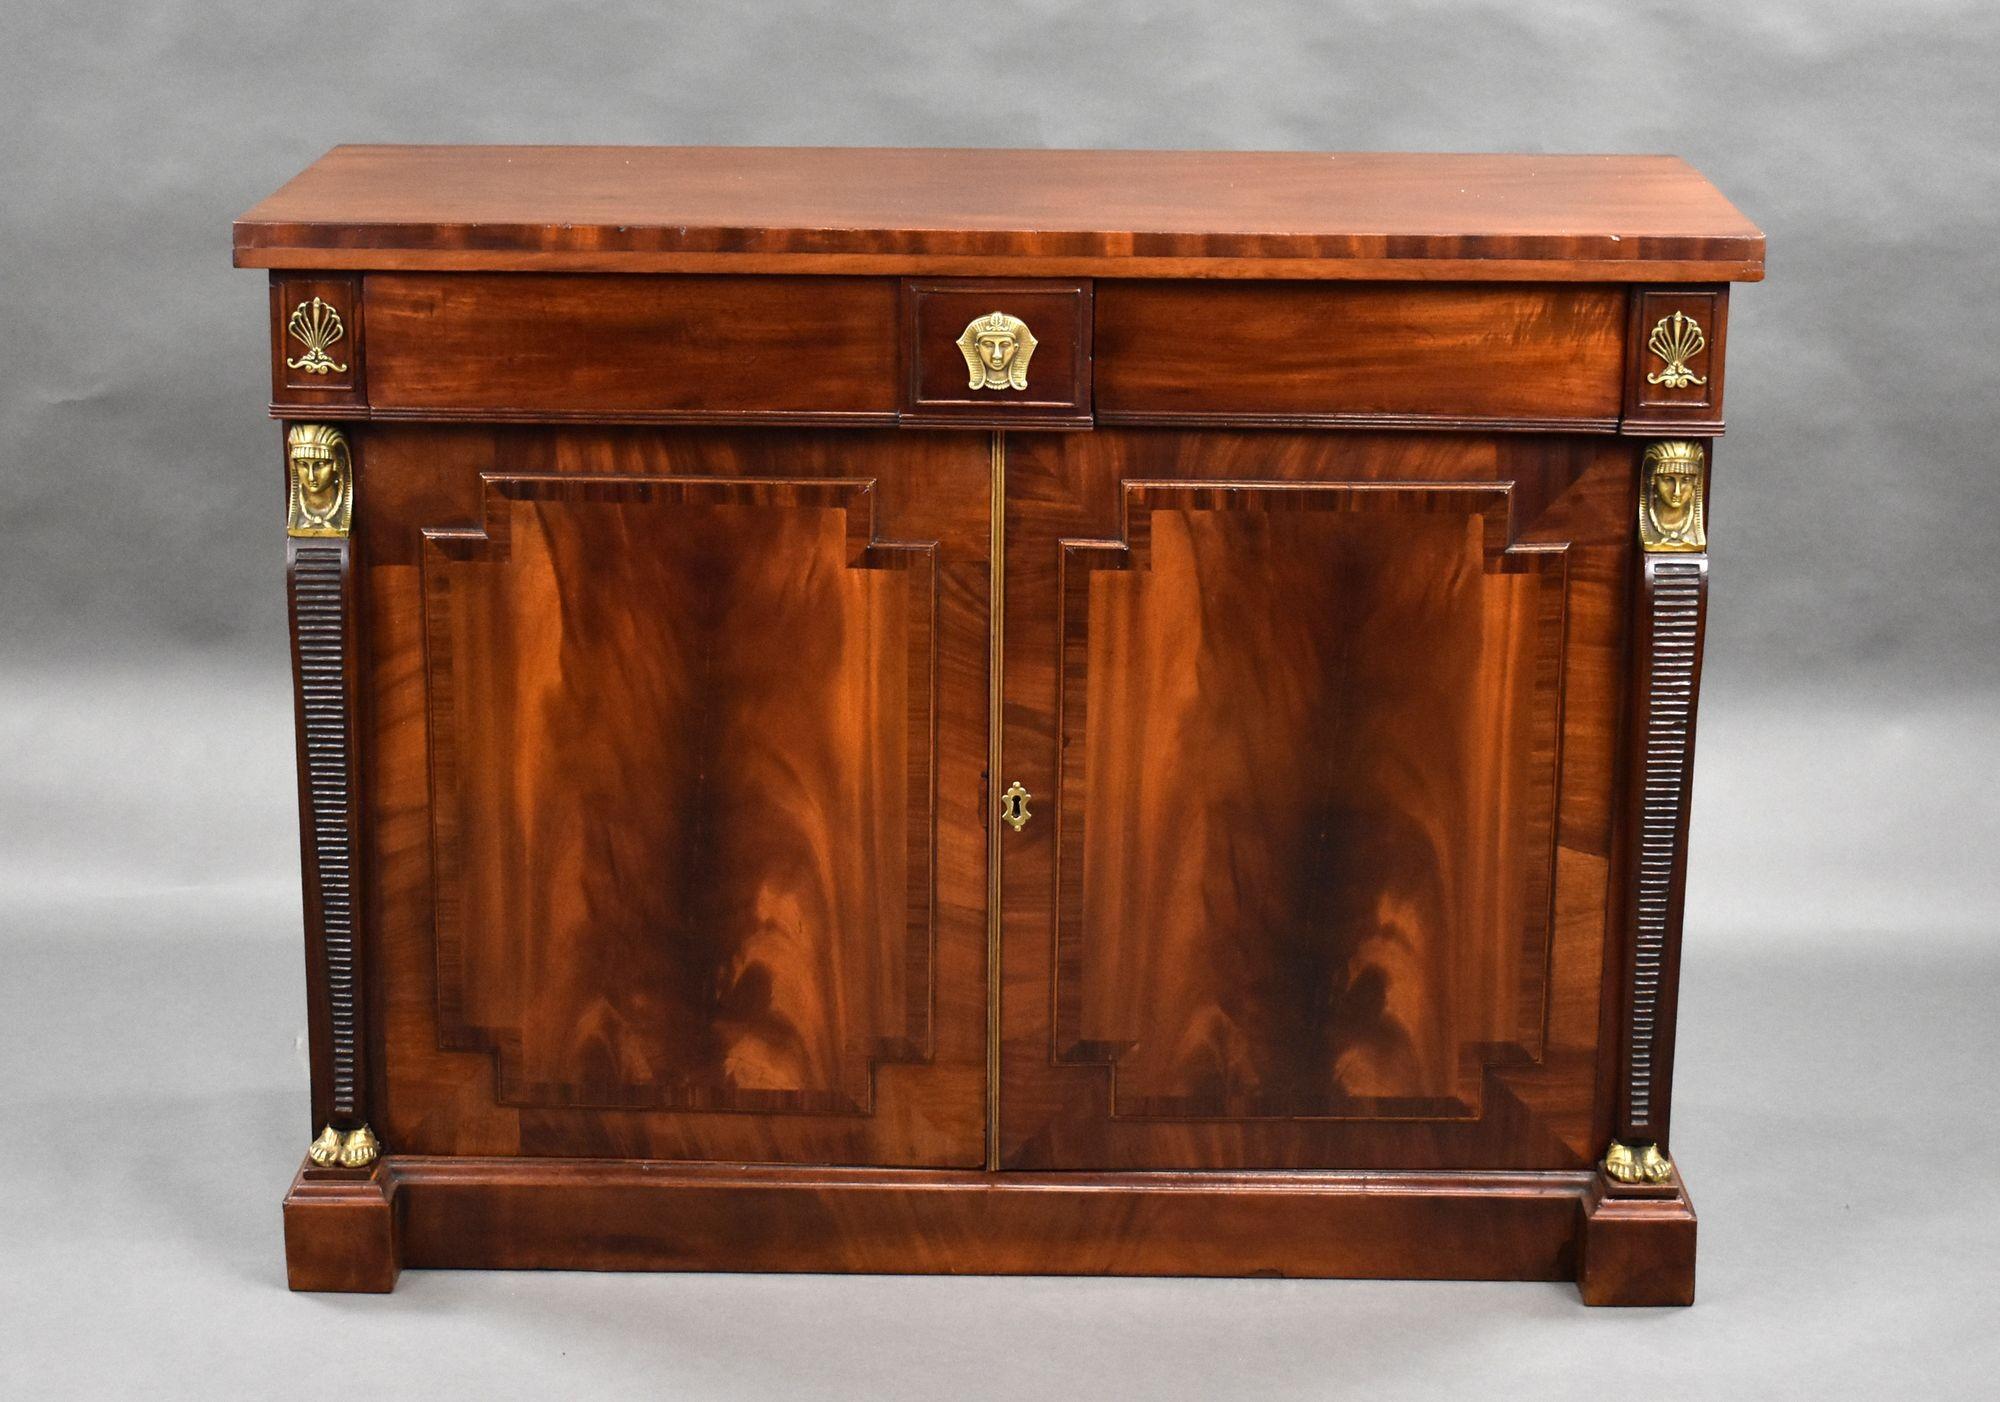 For sale is a good quality Regency mahogany sideboard, decorated with Egyptian style motifs throughout, the doors open to reveal an interior fitted with shelves and drawers. This piece is in very good condition.

Width: 121cm Depth: 44cm Height: 93cm